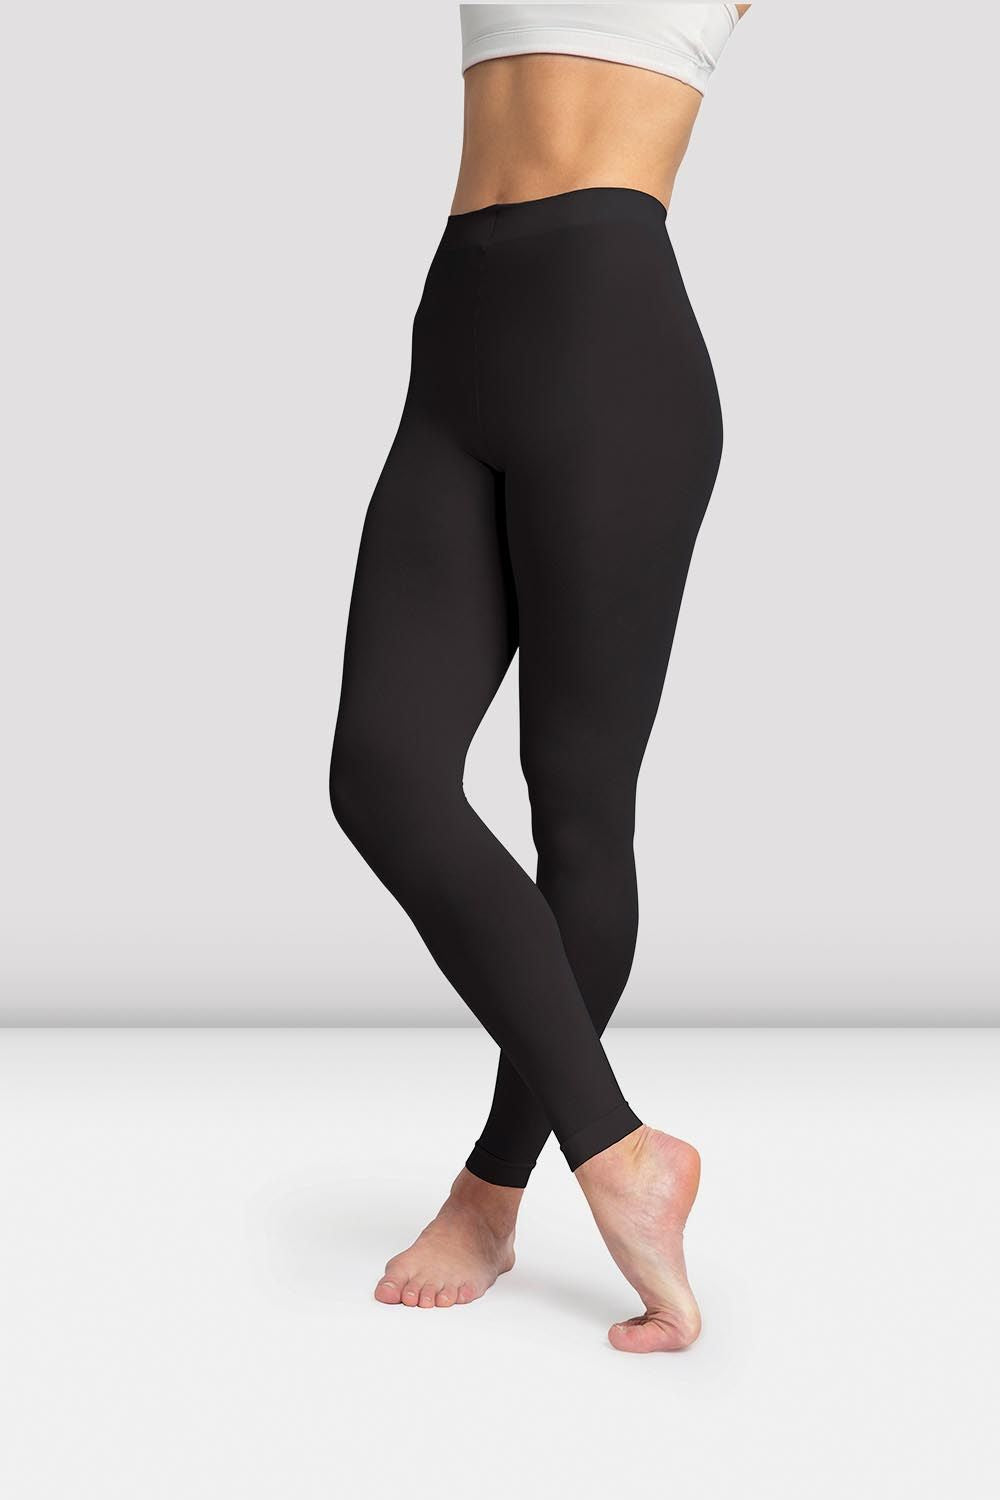 1pc Women's 200g Black Footless Tights Suitable For 5-15°c